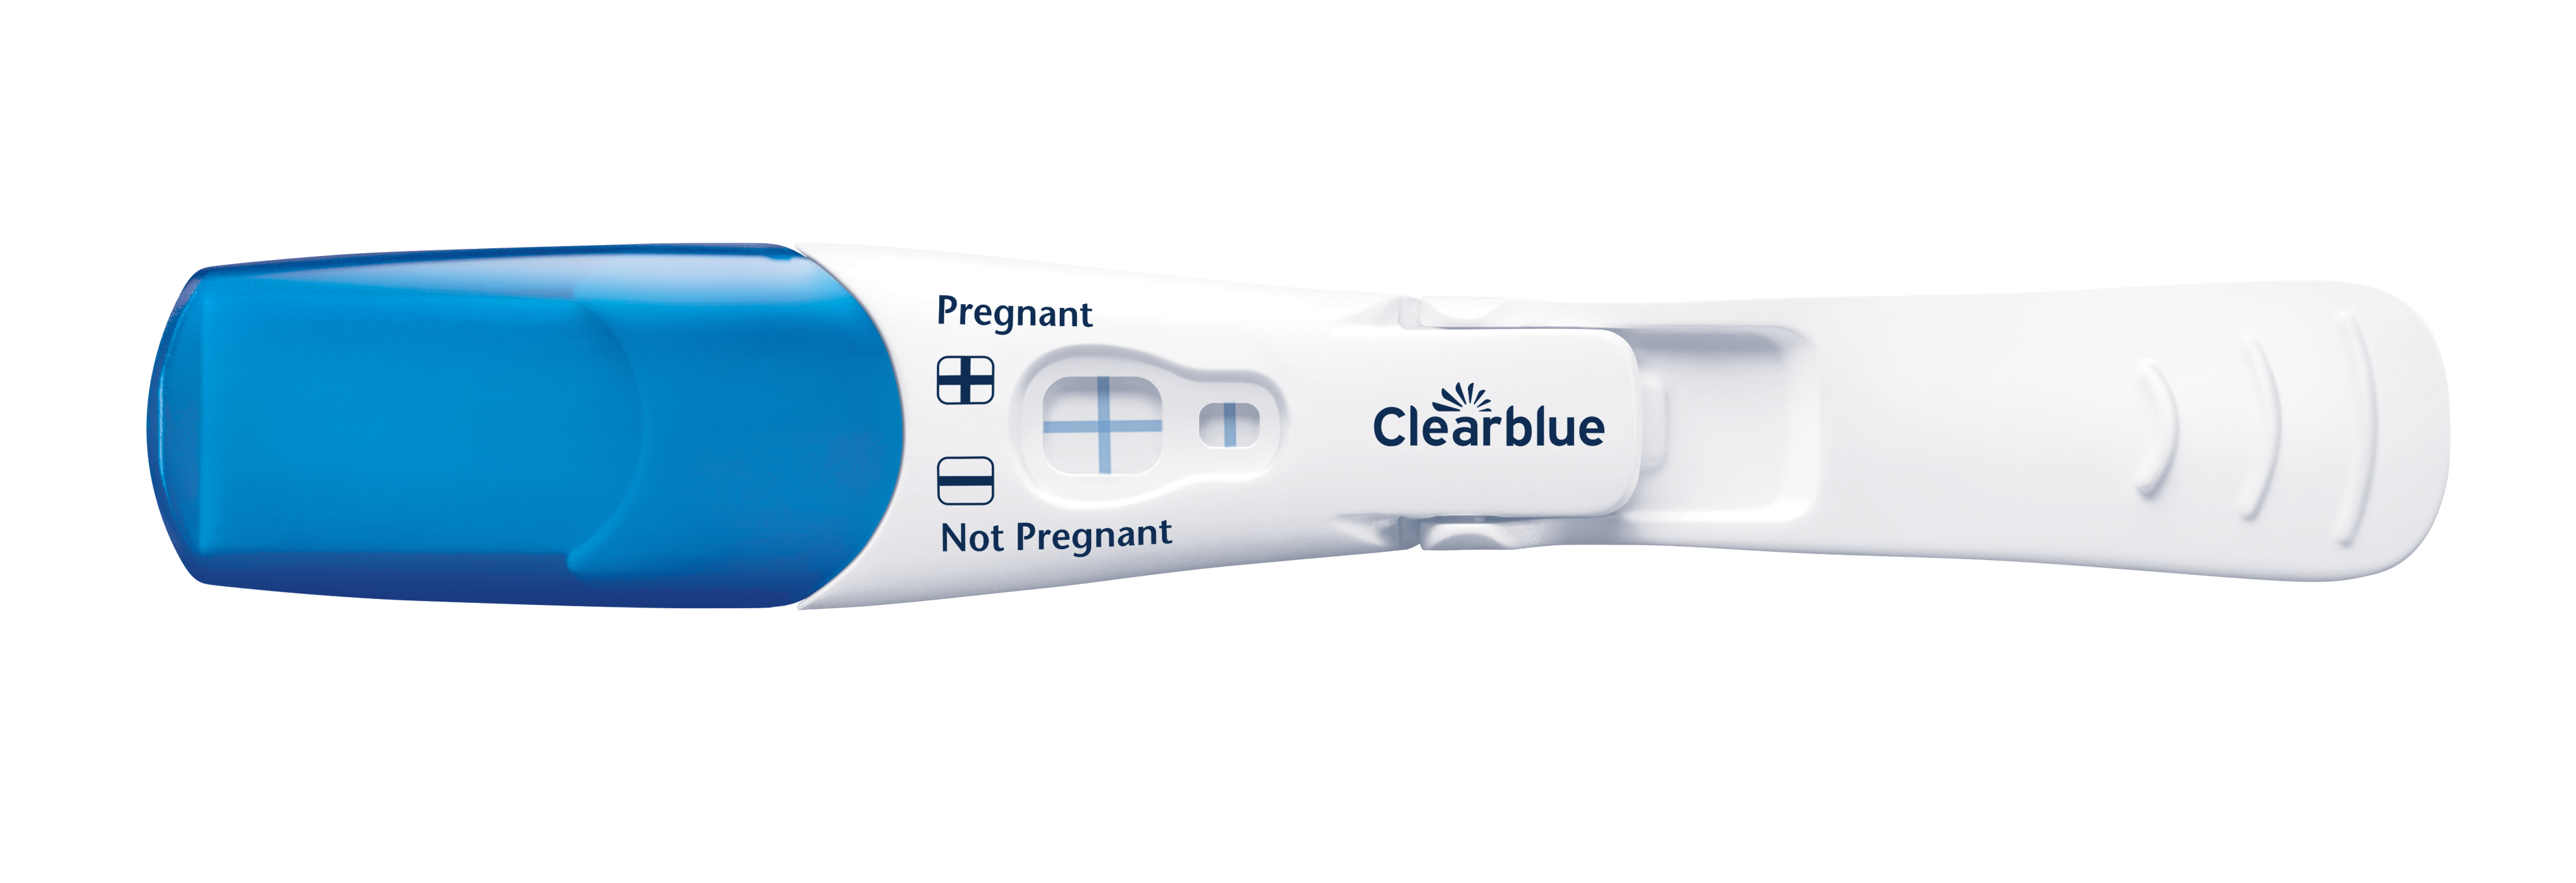 Clearblue® Rapid Detection Pregnancy Test